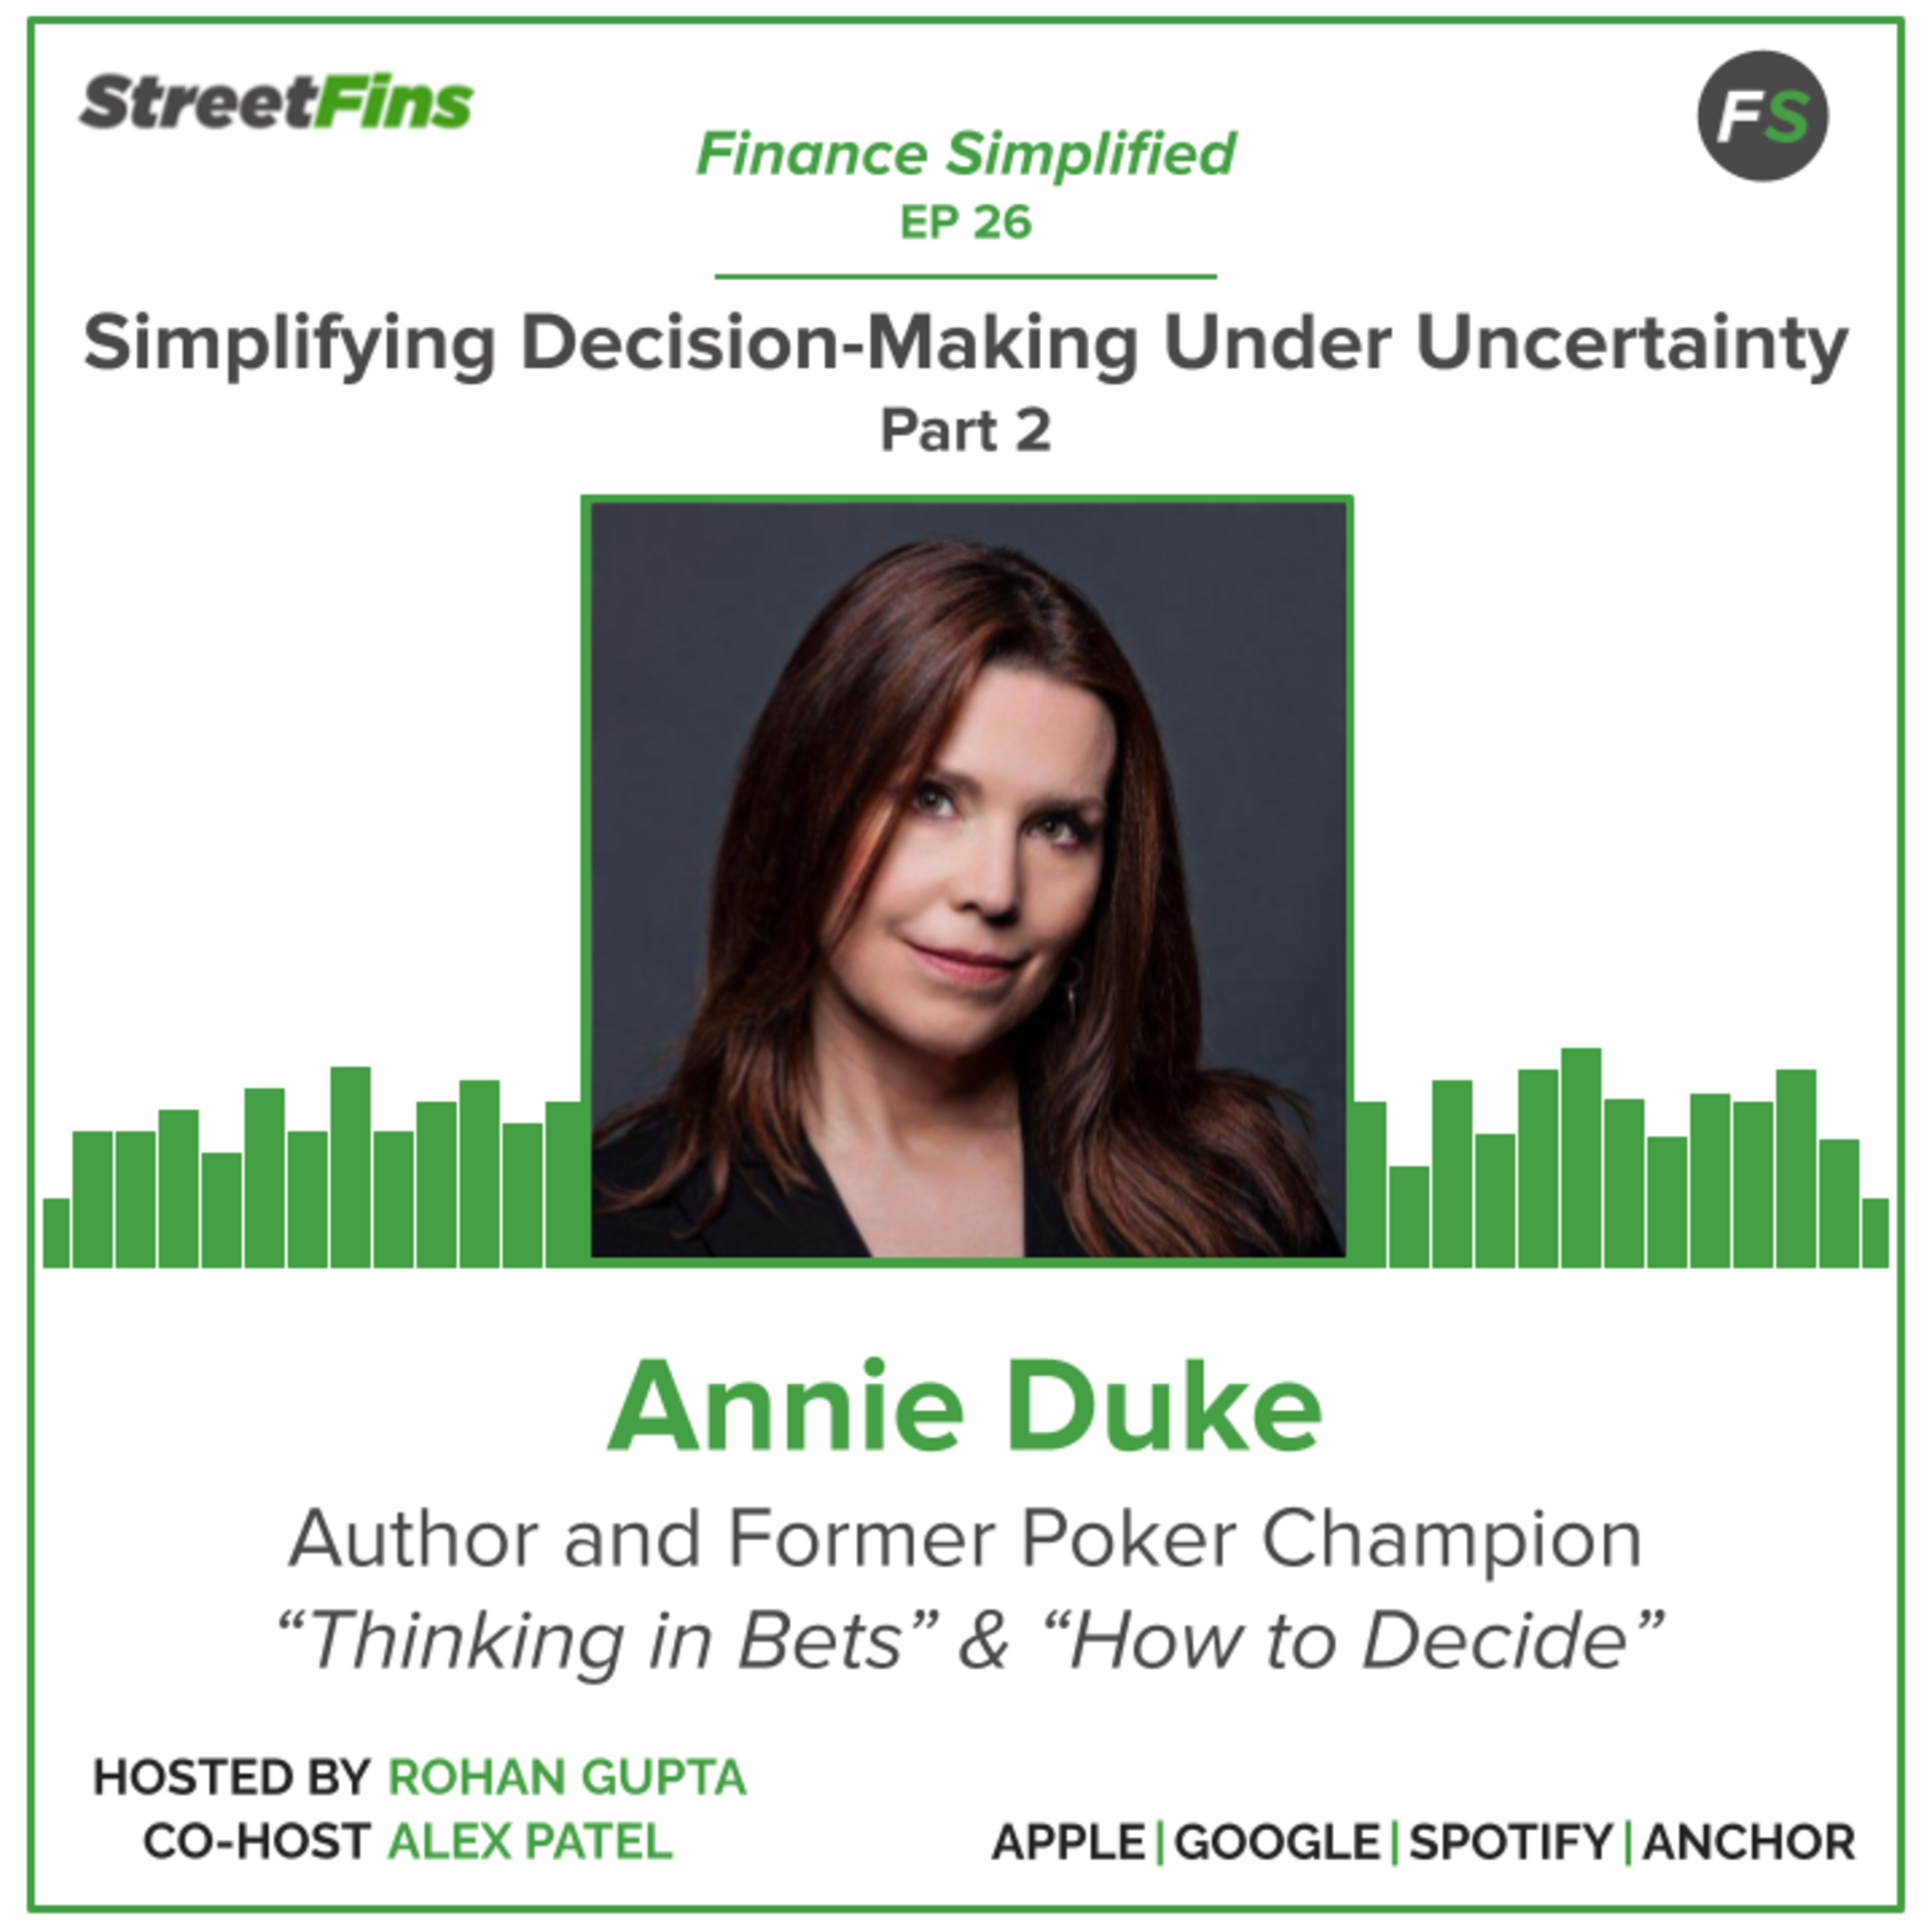 EP 26 — Simplifying Decision-Making Under Uncertainty Part 2 with Annie Duke, author of “Thinking in Bets”